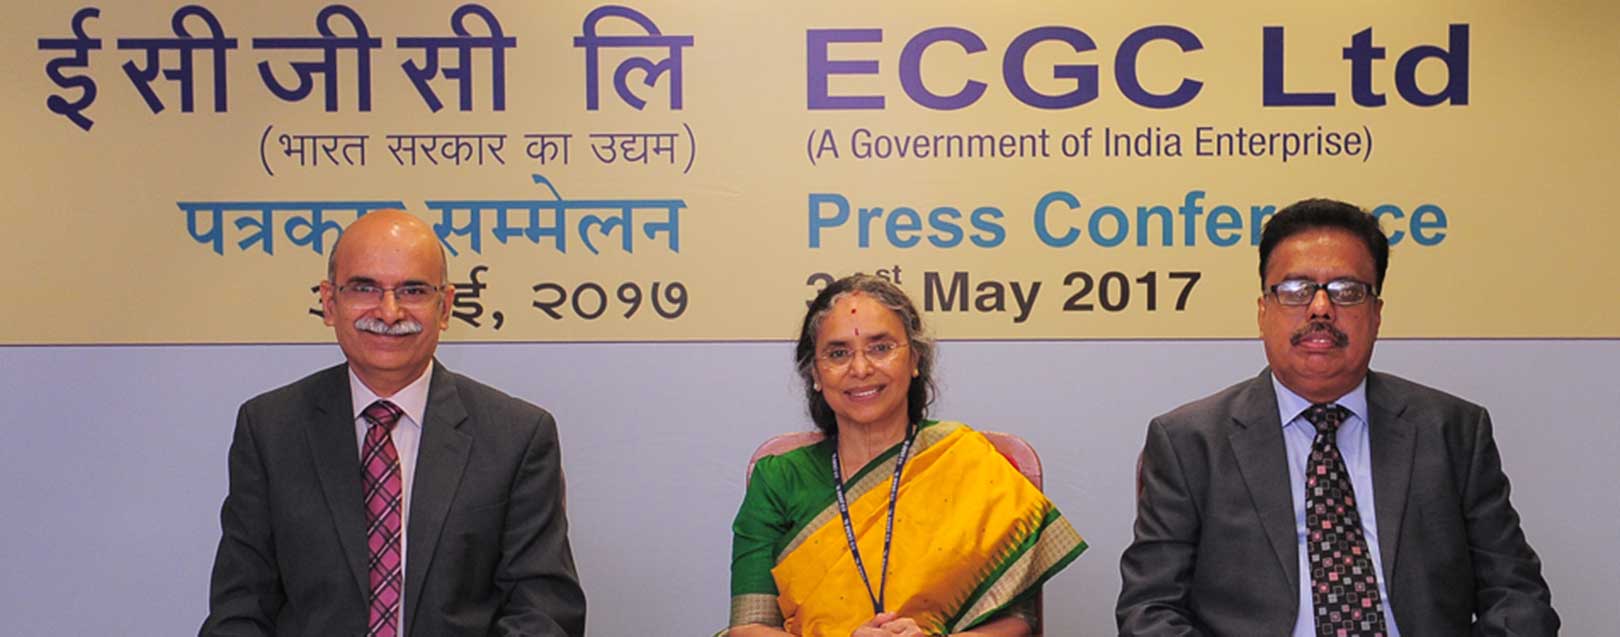 Reduction in insurance cost for exporters, ECGC